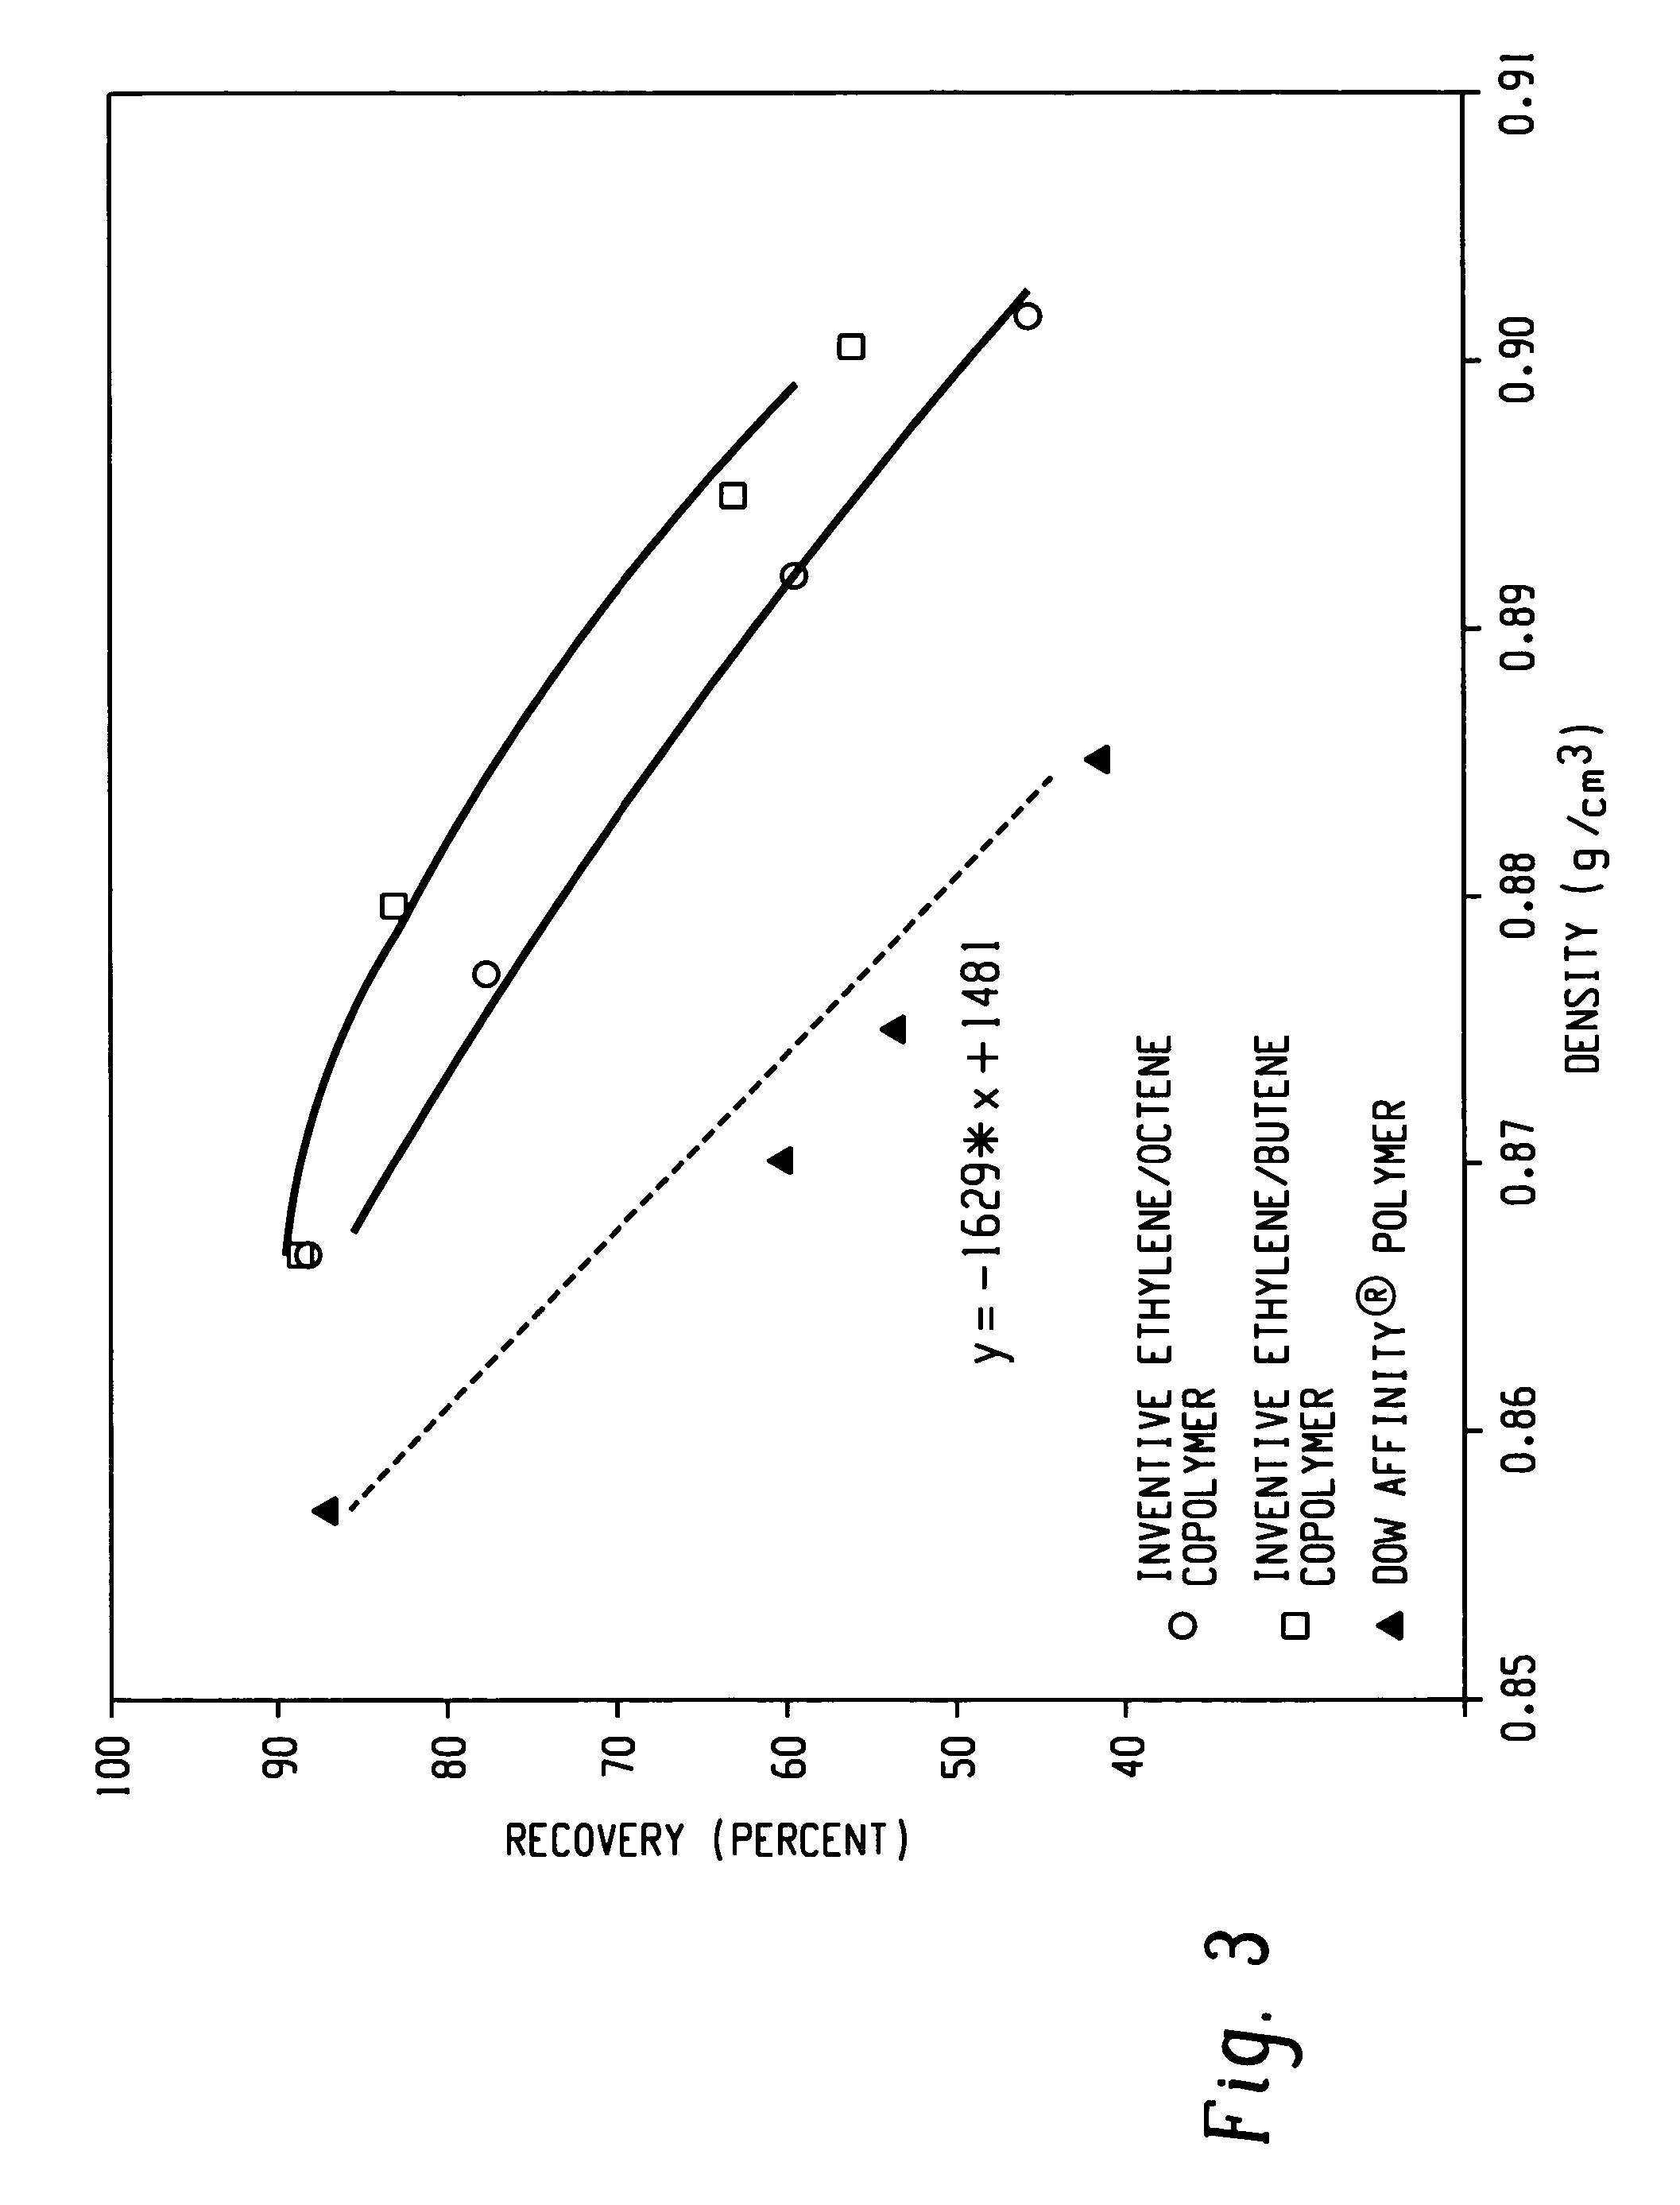 Filled polymer compositions made from interpolymers of ethylene/α-olefins and uses thereof